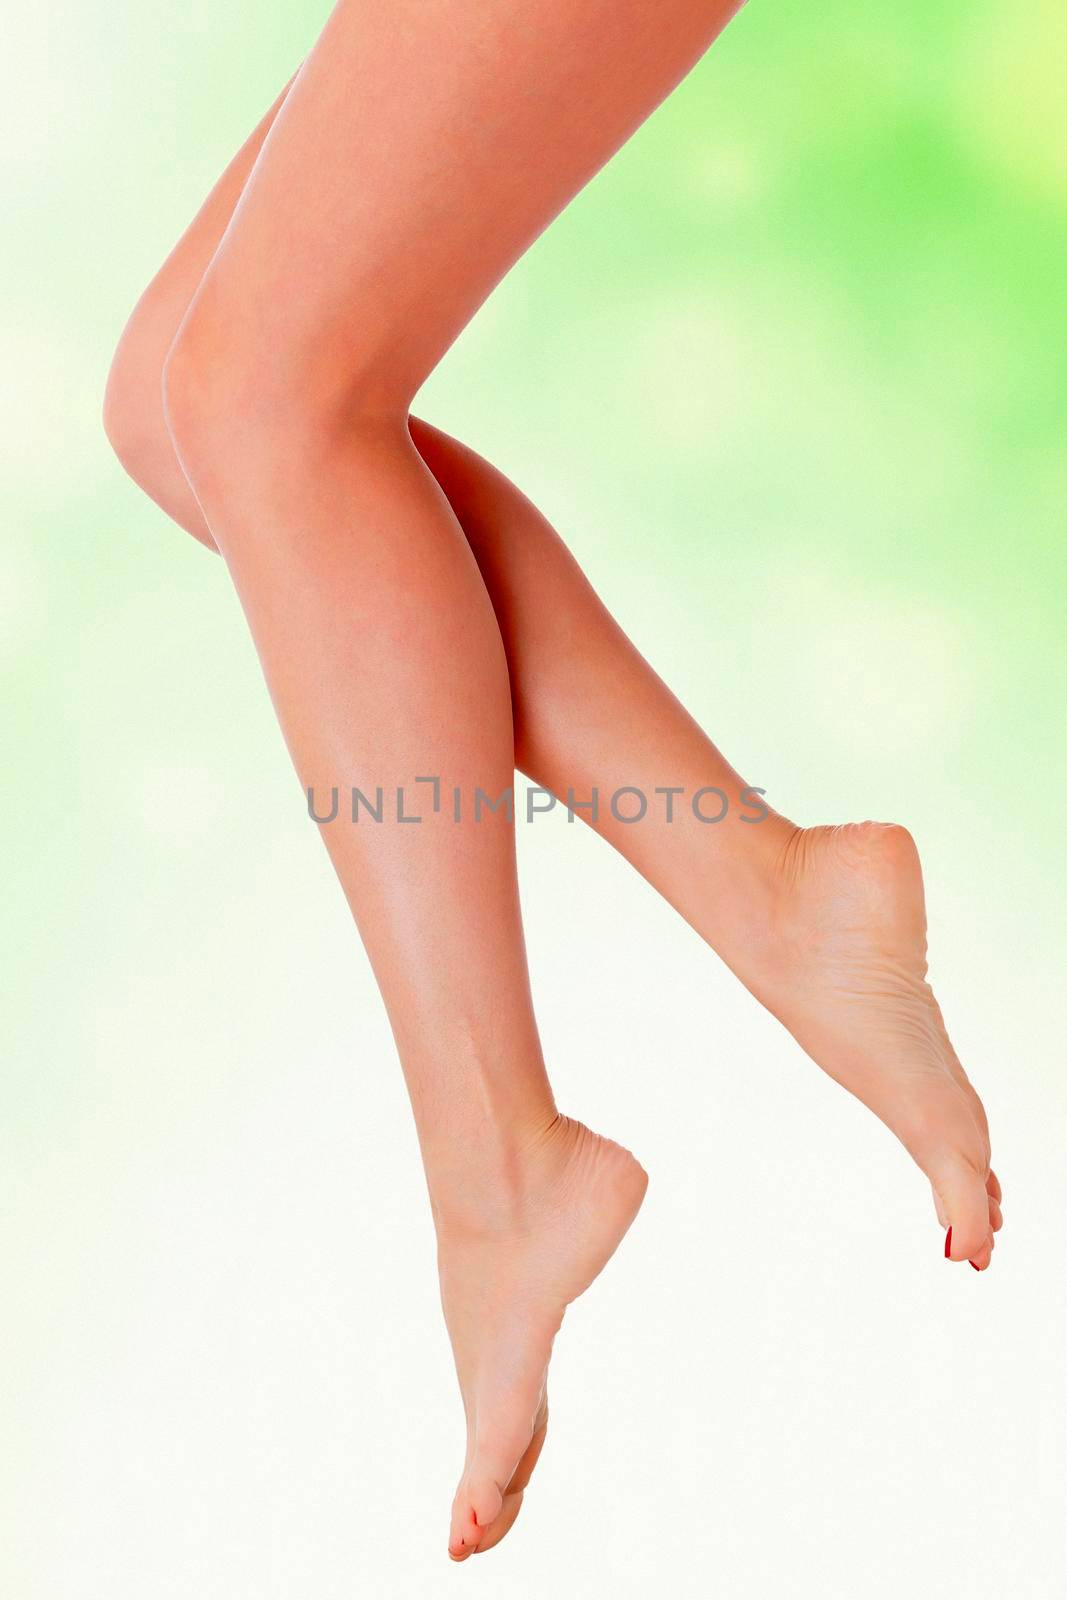 Legs in the air, green blurred background by Nobilior